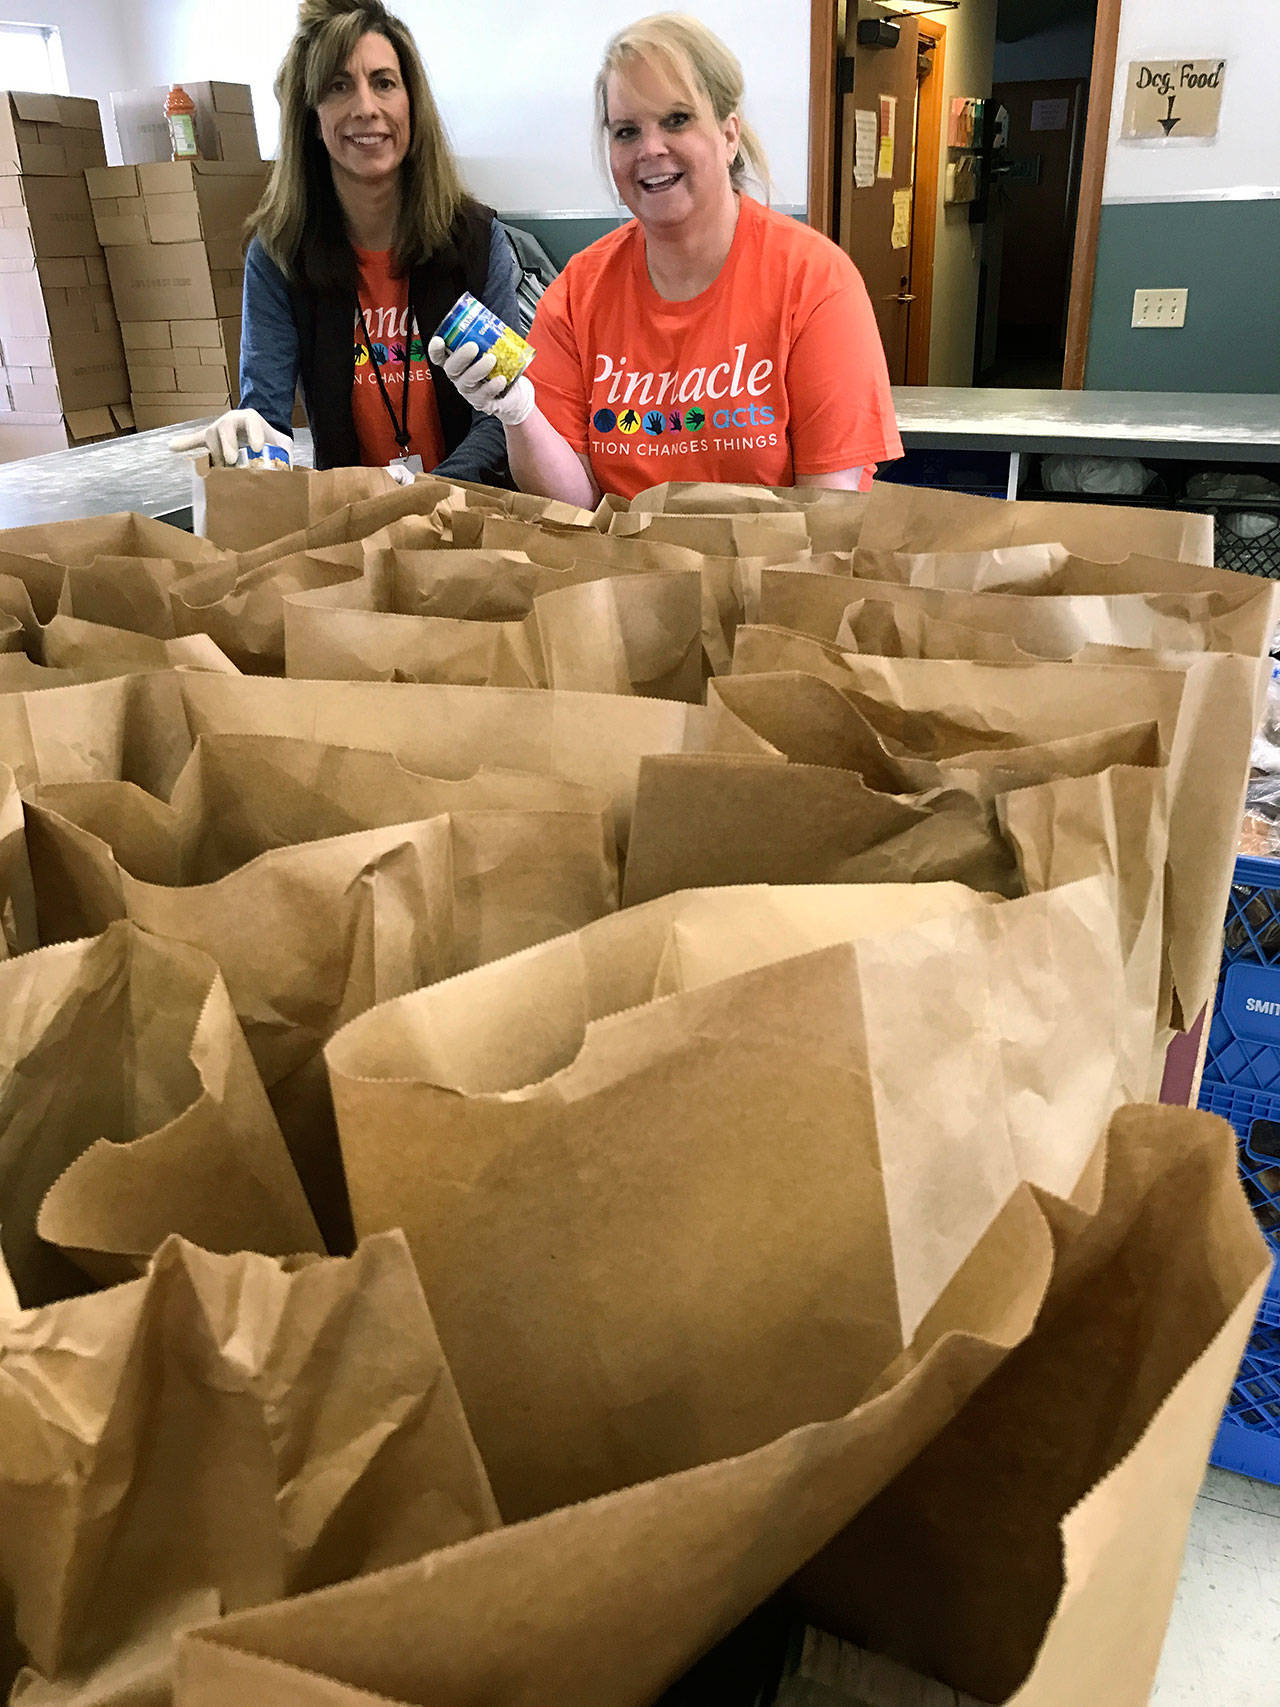 Pinnacle Foods’ Algona teammates Cindy Sankey-Hagen, left, and Karen Munson volunteered at the Auburn Food Bank, separating, sorting and bagging donated food items to provide for those in need. COURTESY PHOTO